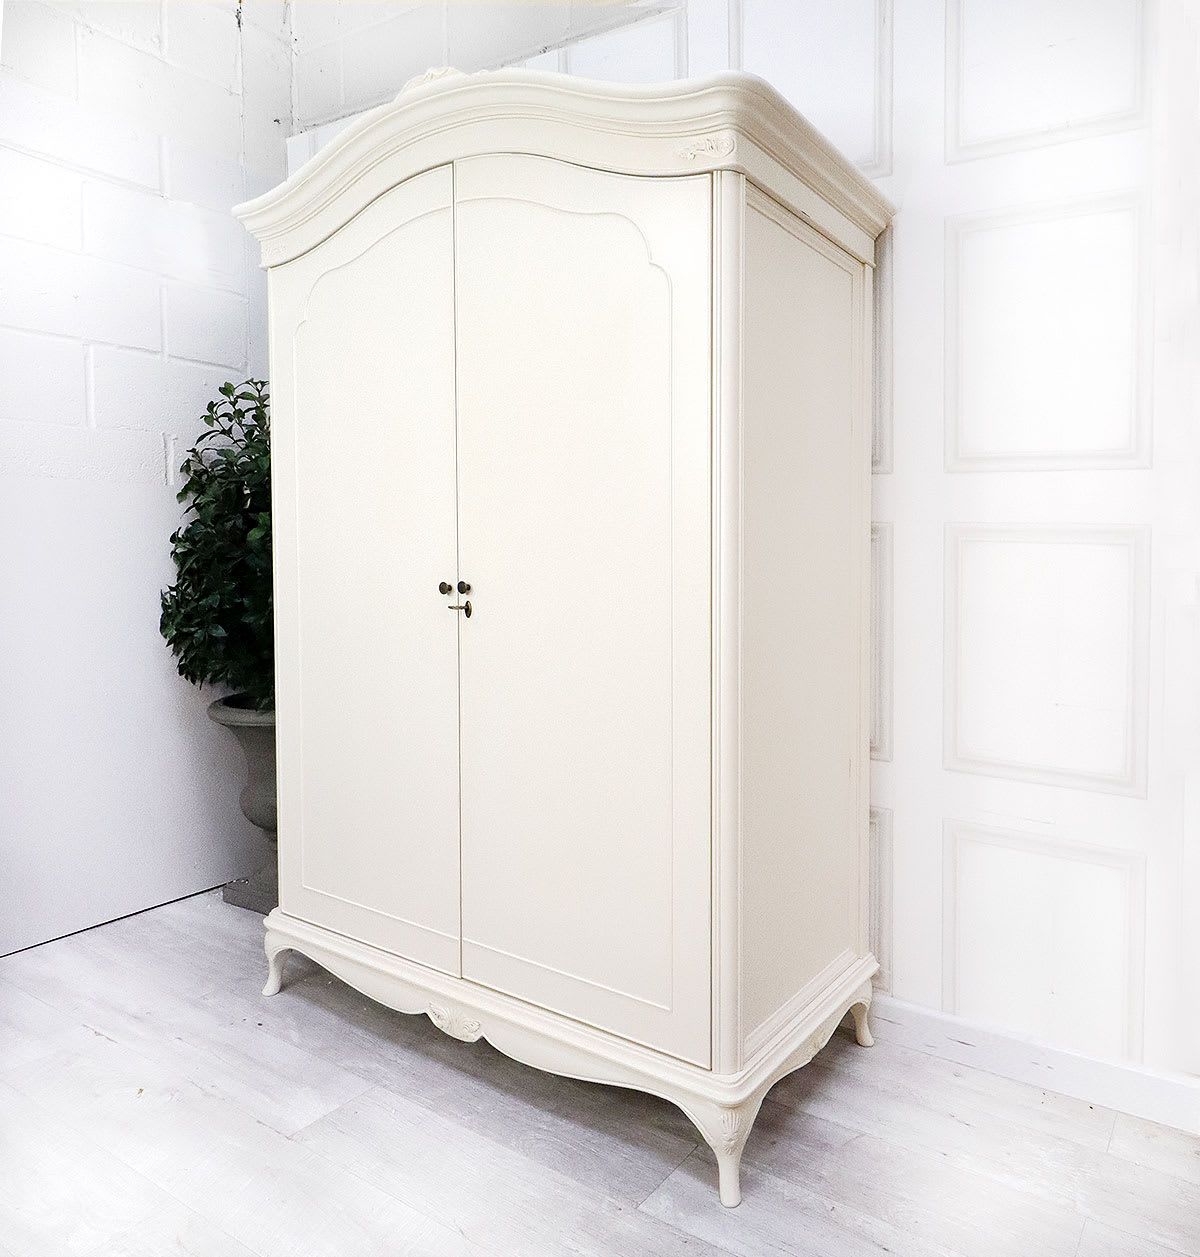 Willis & Gambier French Style Ivory Large Armoire Wardrobe | Nicky Cornell  A Uk Stockist Intended For French White Wardrobes (View 3 of 15)